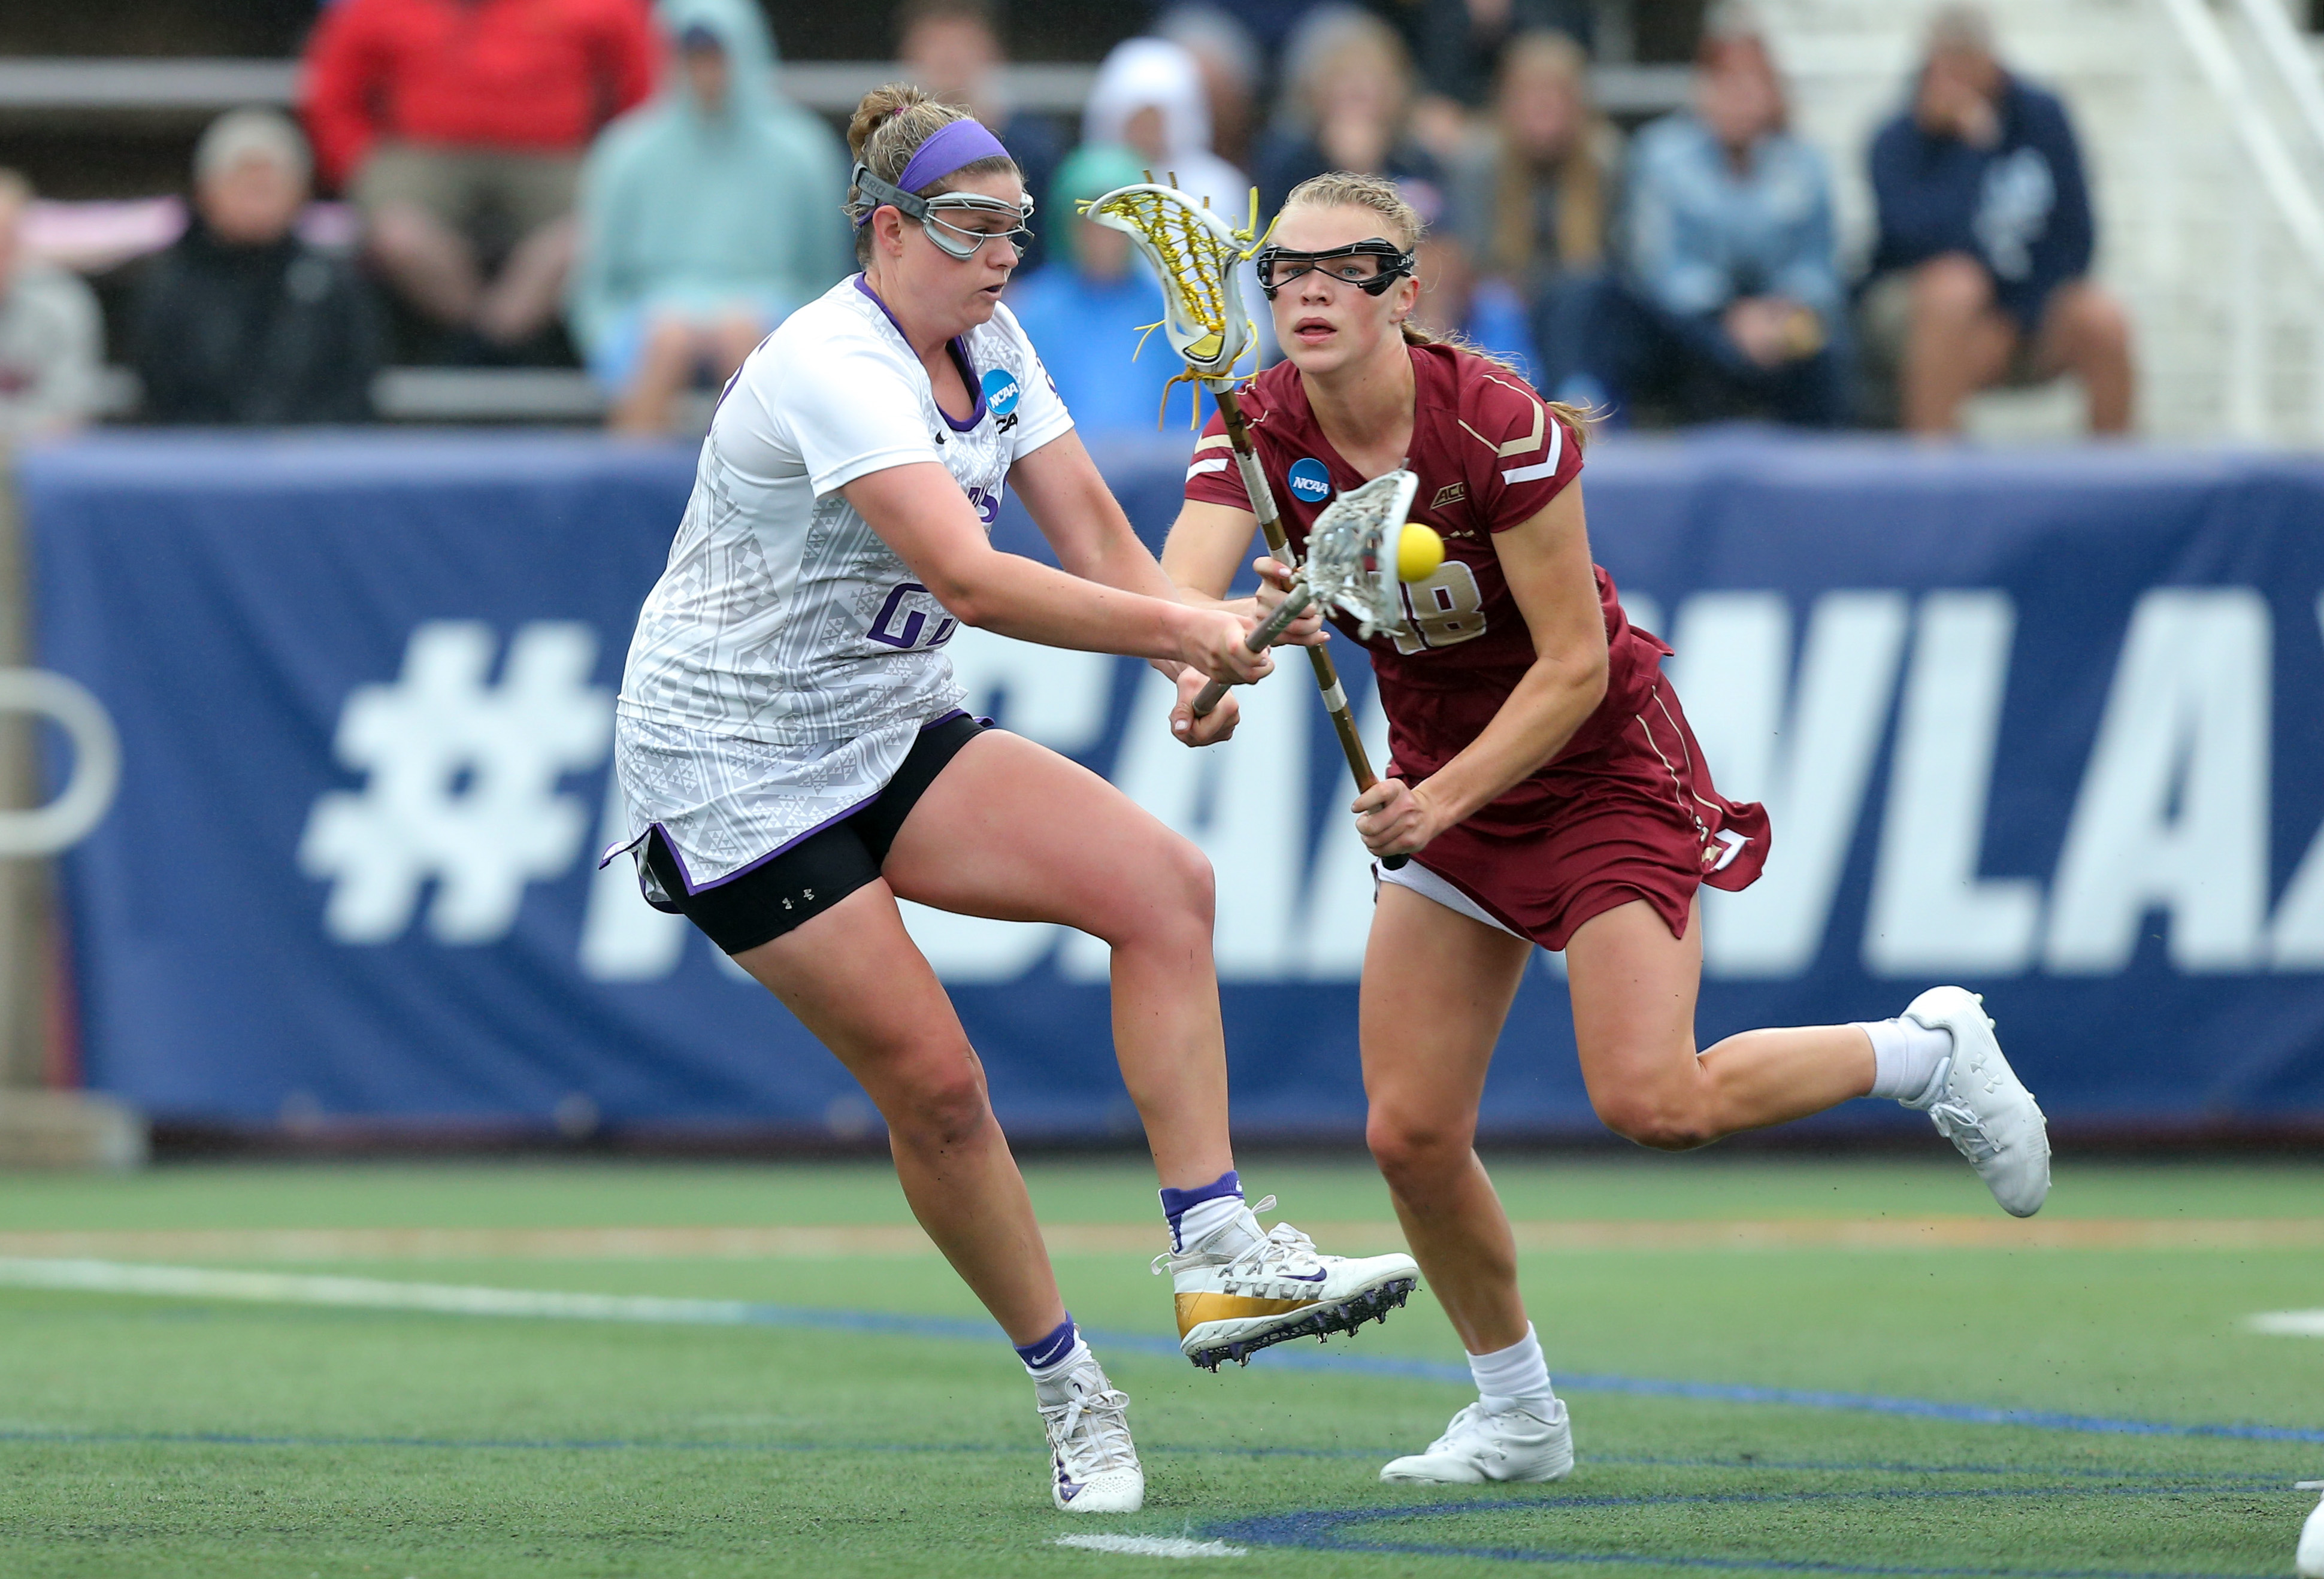 How to Watch James Madison vs. Drexel in Women’s College Lacrosse: Live Stream, TV Channel, Start Time - Sports Illustrated